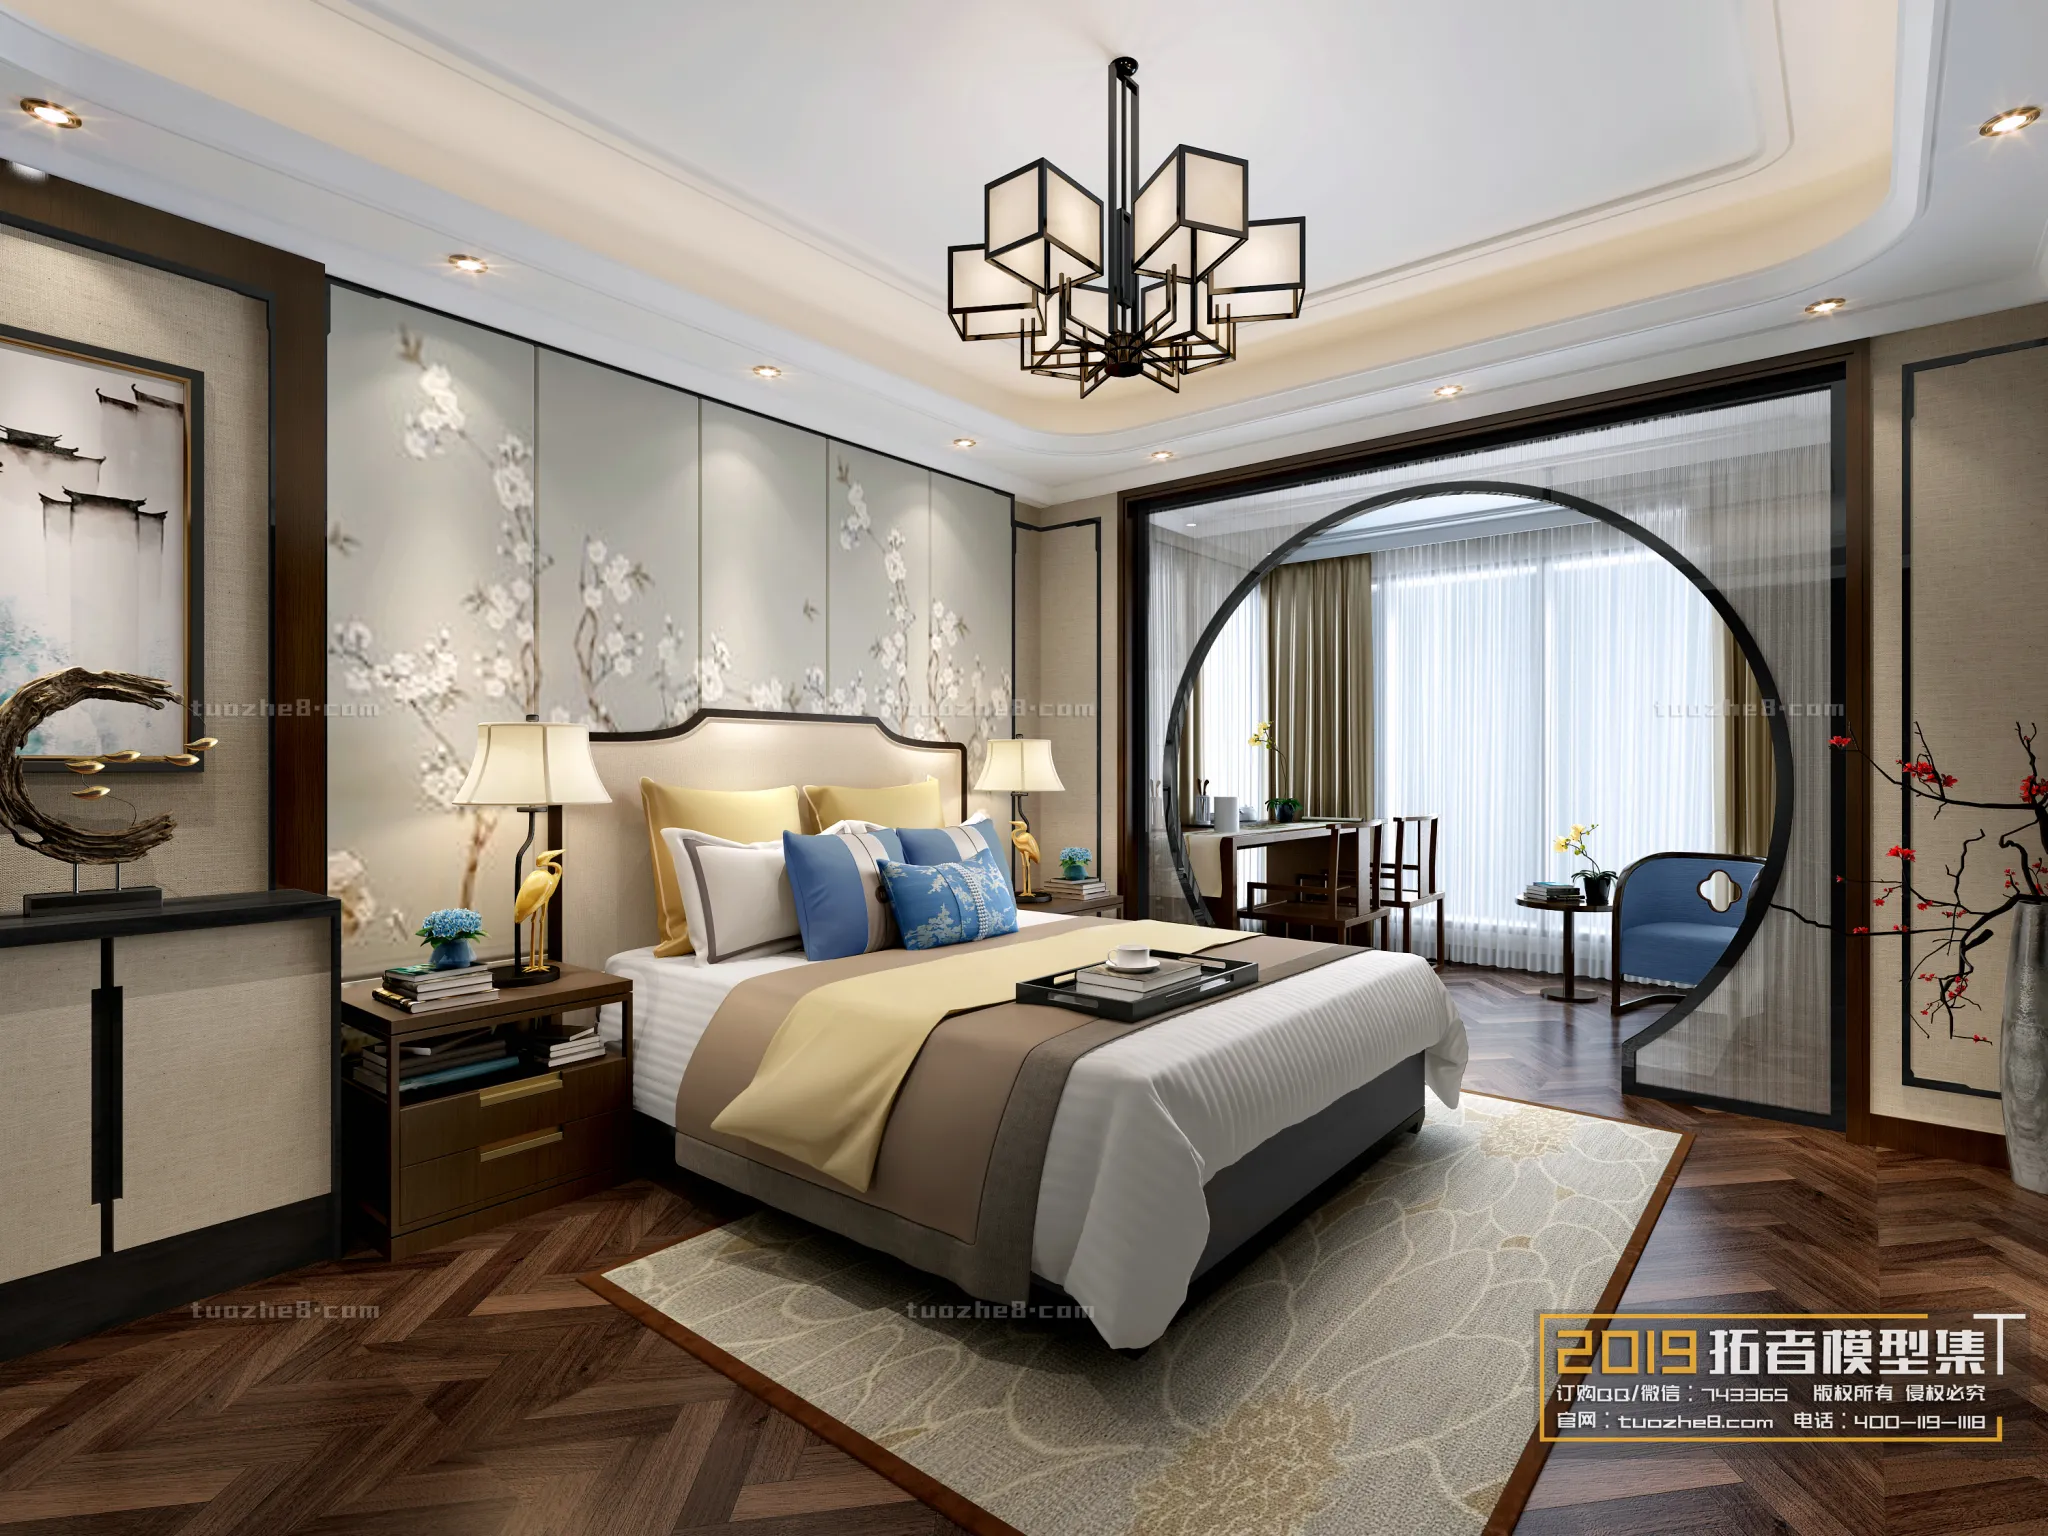 Extension Interior – BEDROOM – CHINESE STYLES – 019